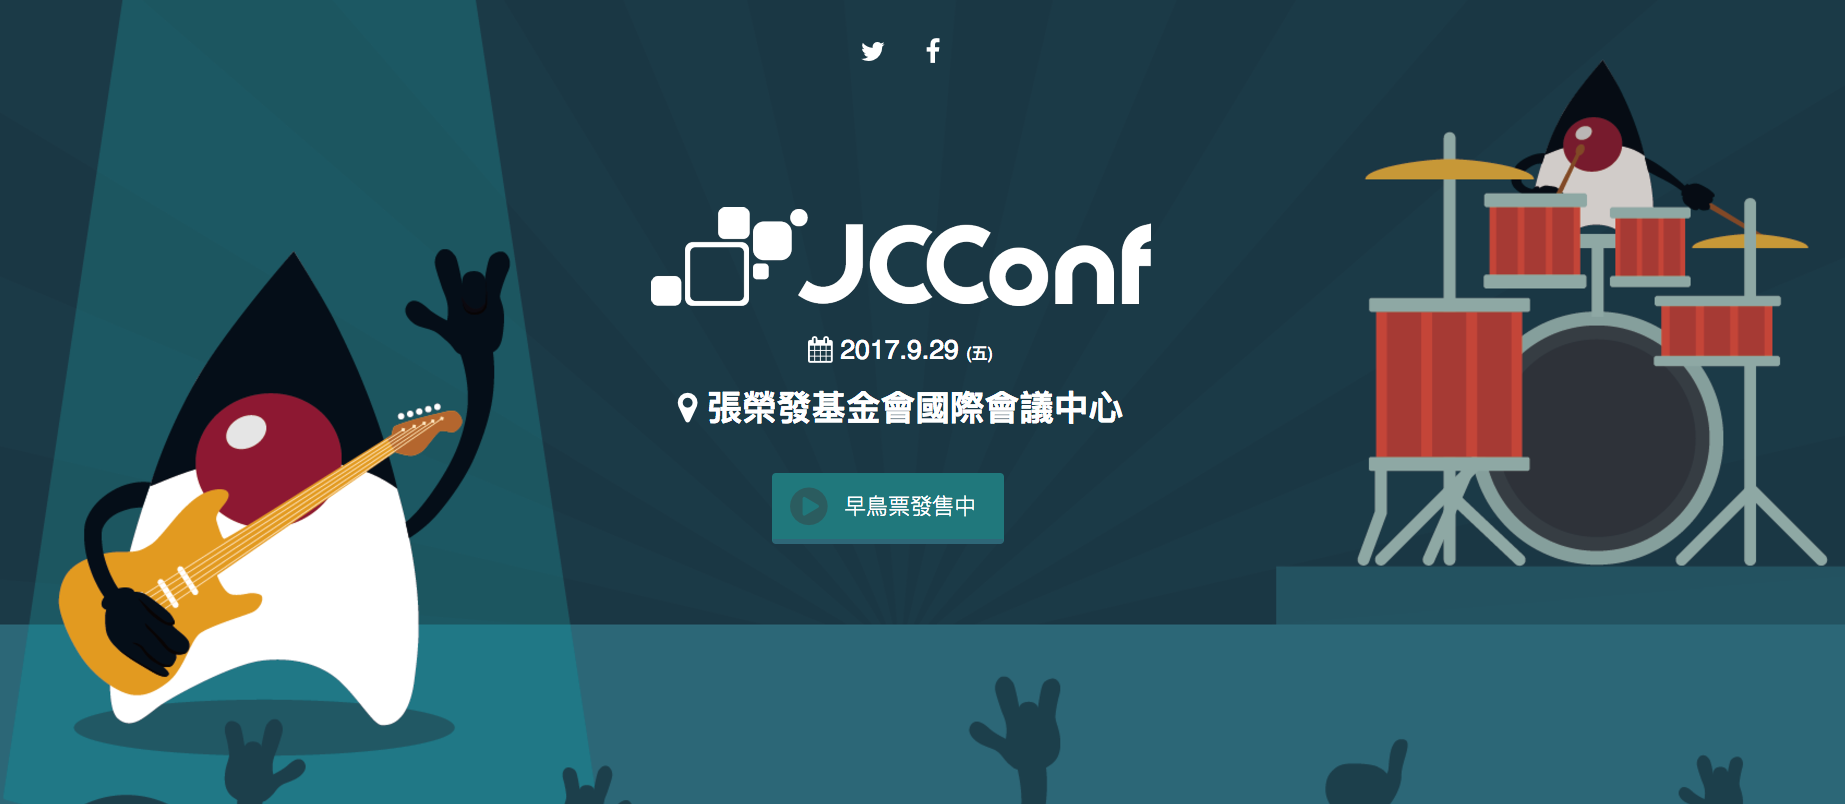 Event cover image for Java Community Conference Taiwan 2017